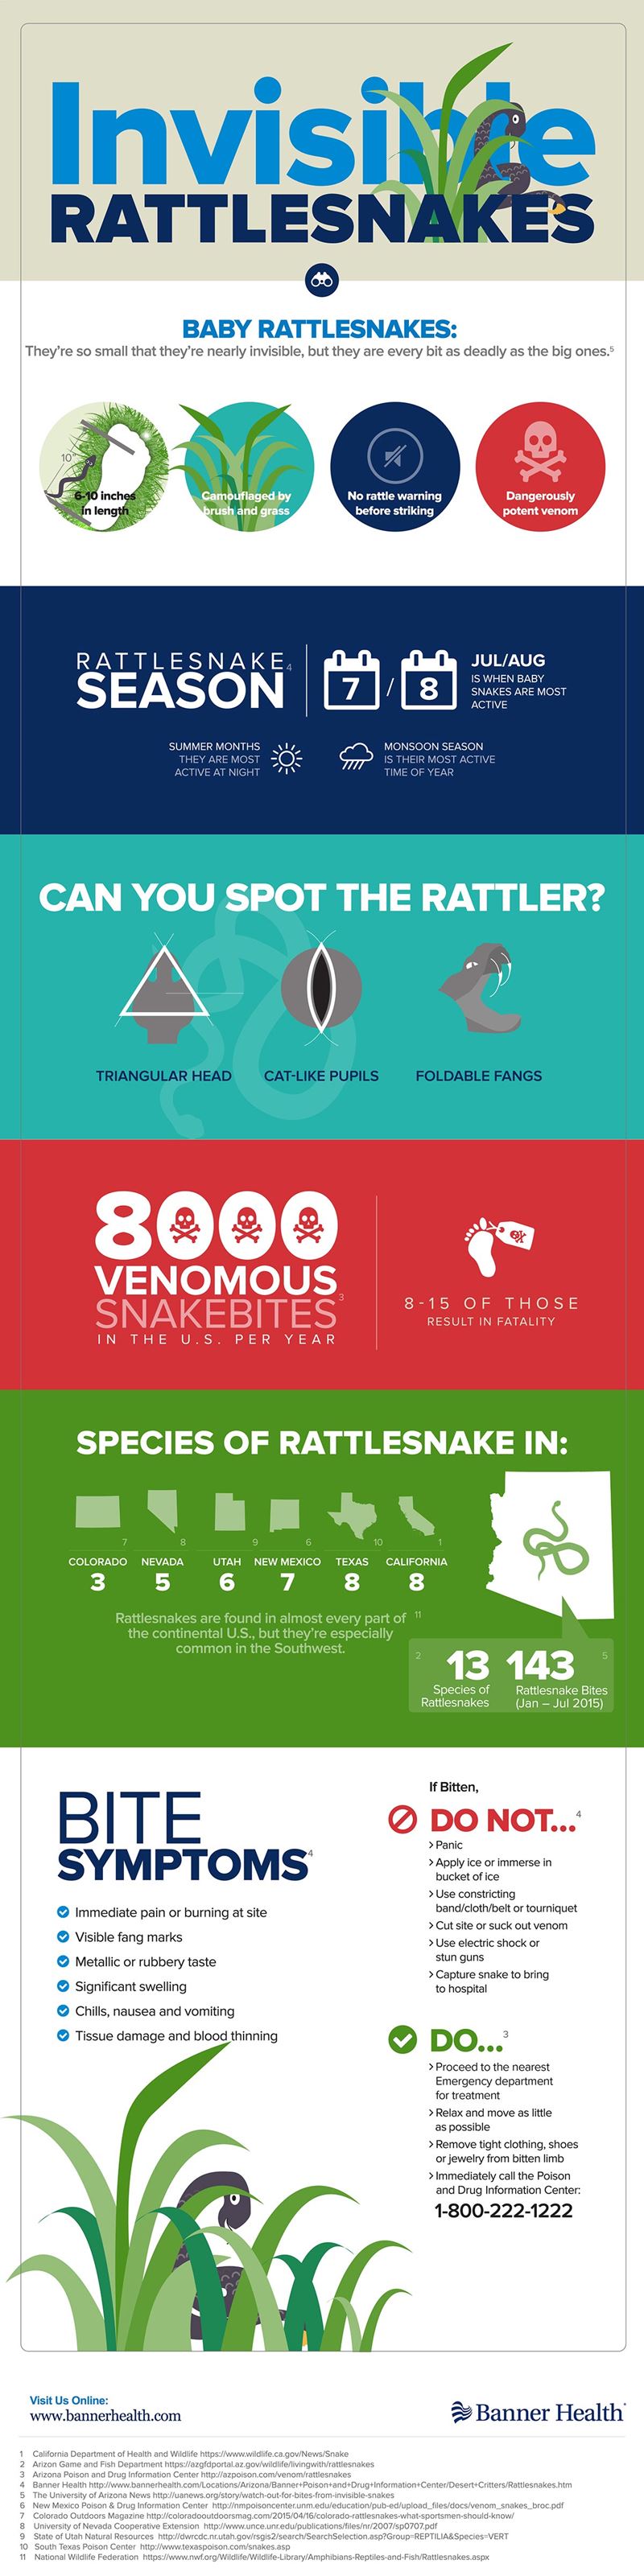 invisible-rattlesnakes-infographic-2017